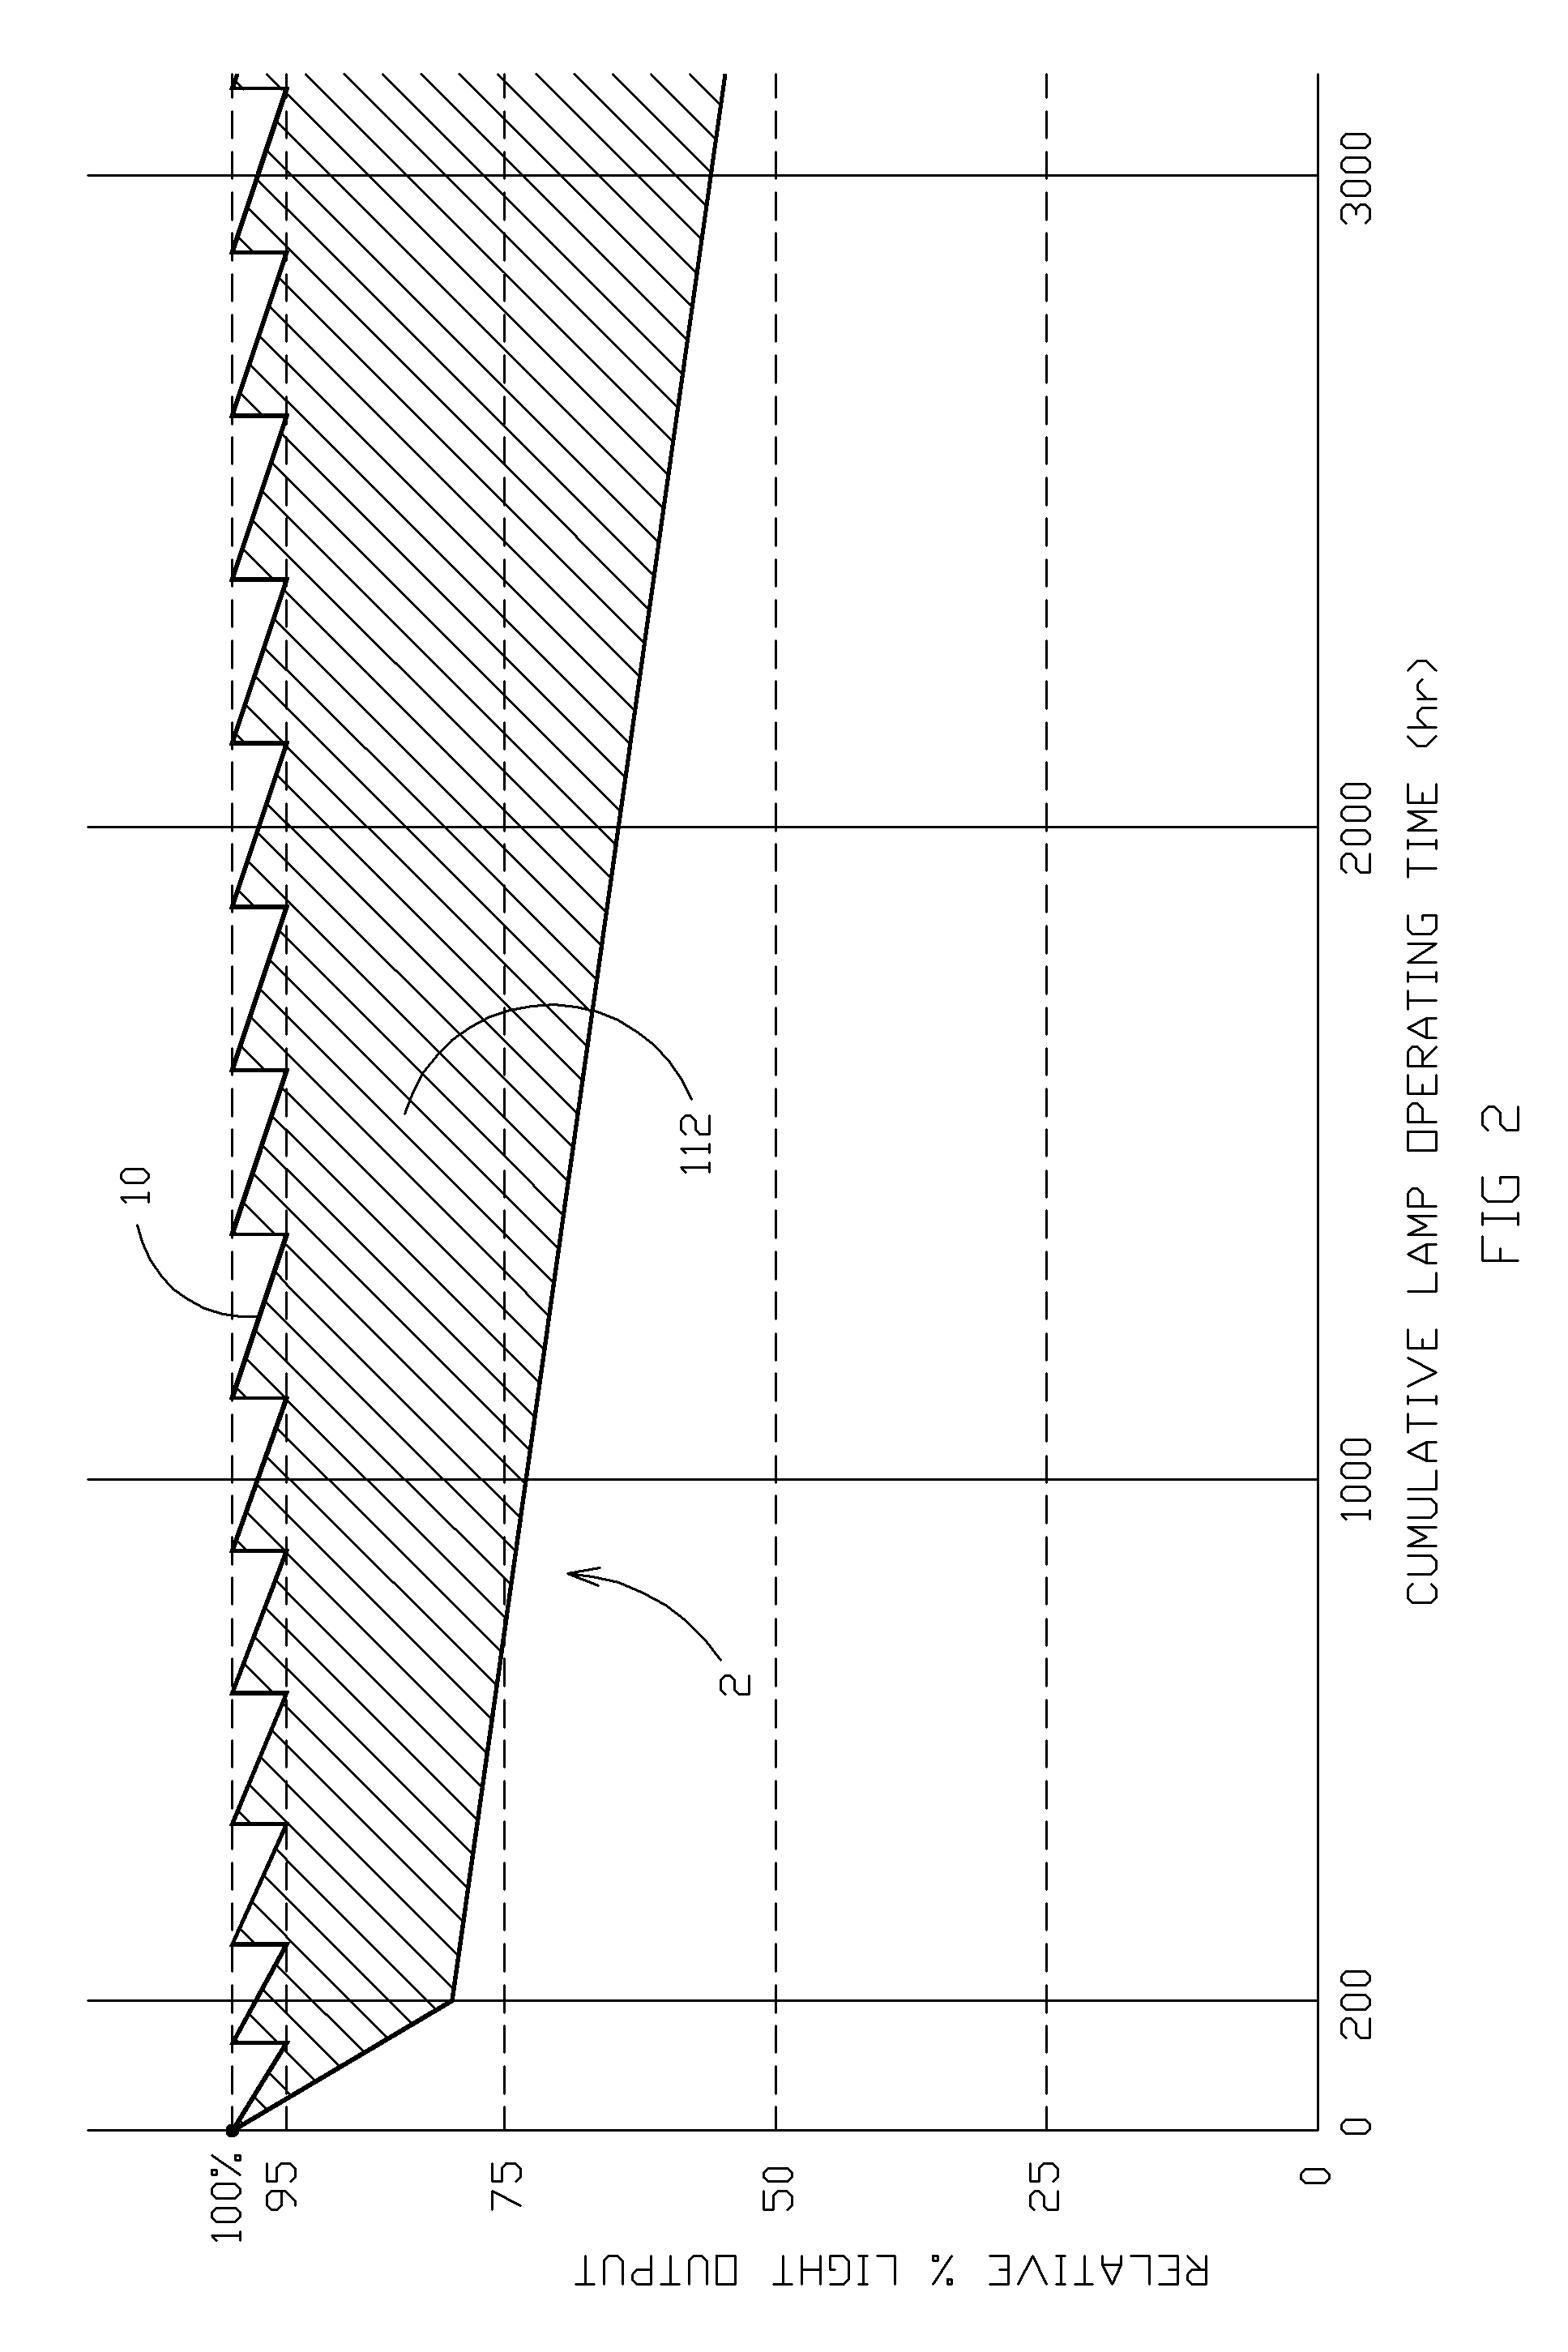 Apparatus, method, and system for improved switching methods for power adjustments in light sources